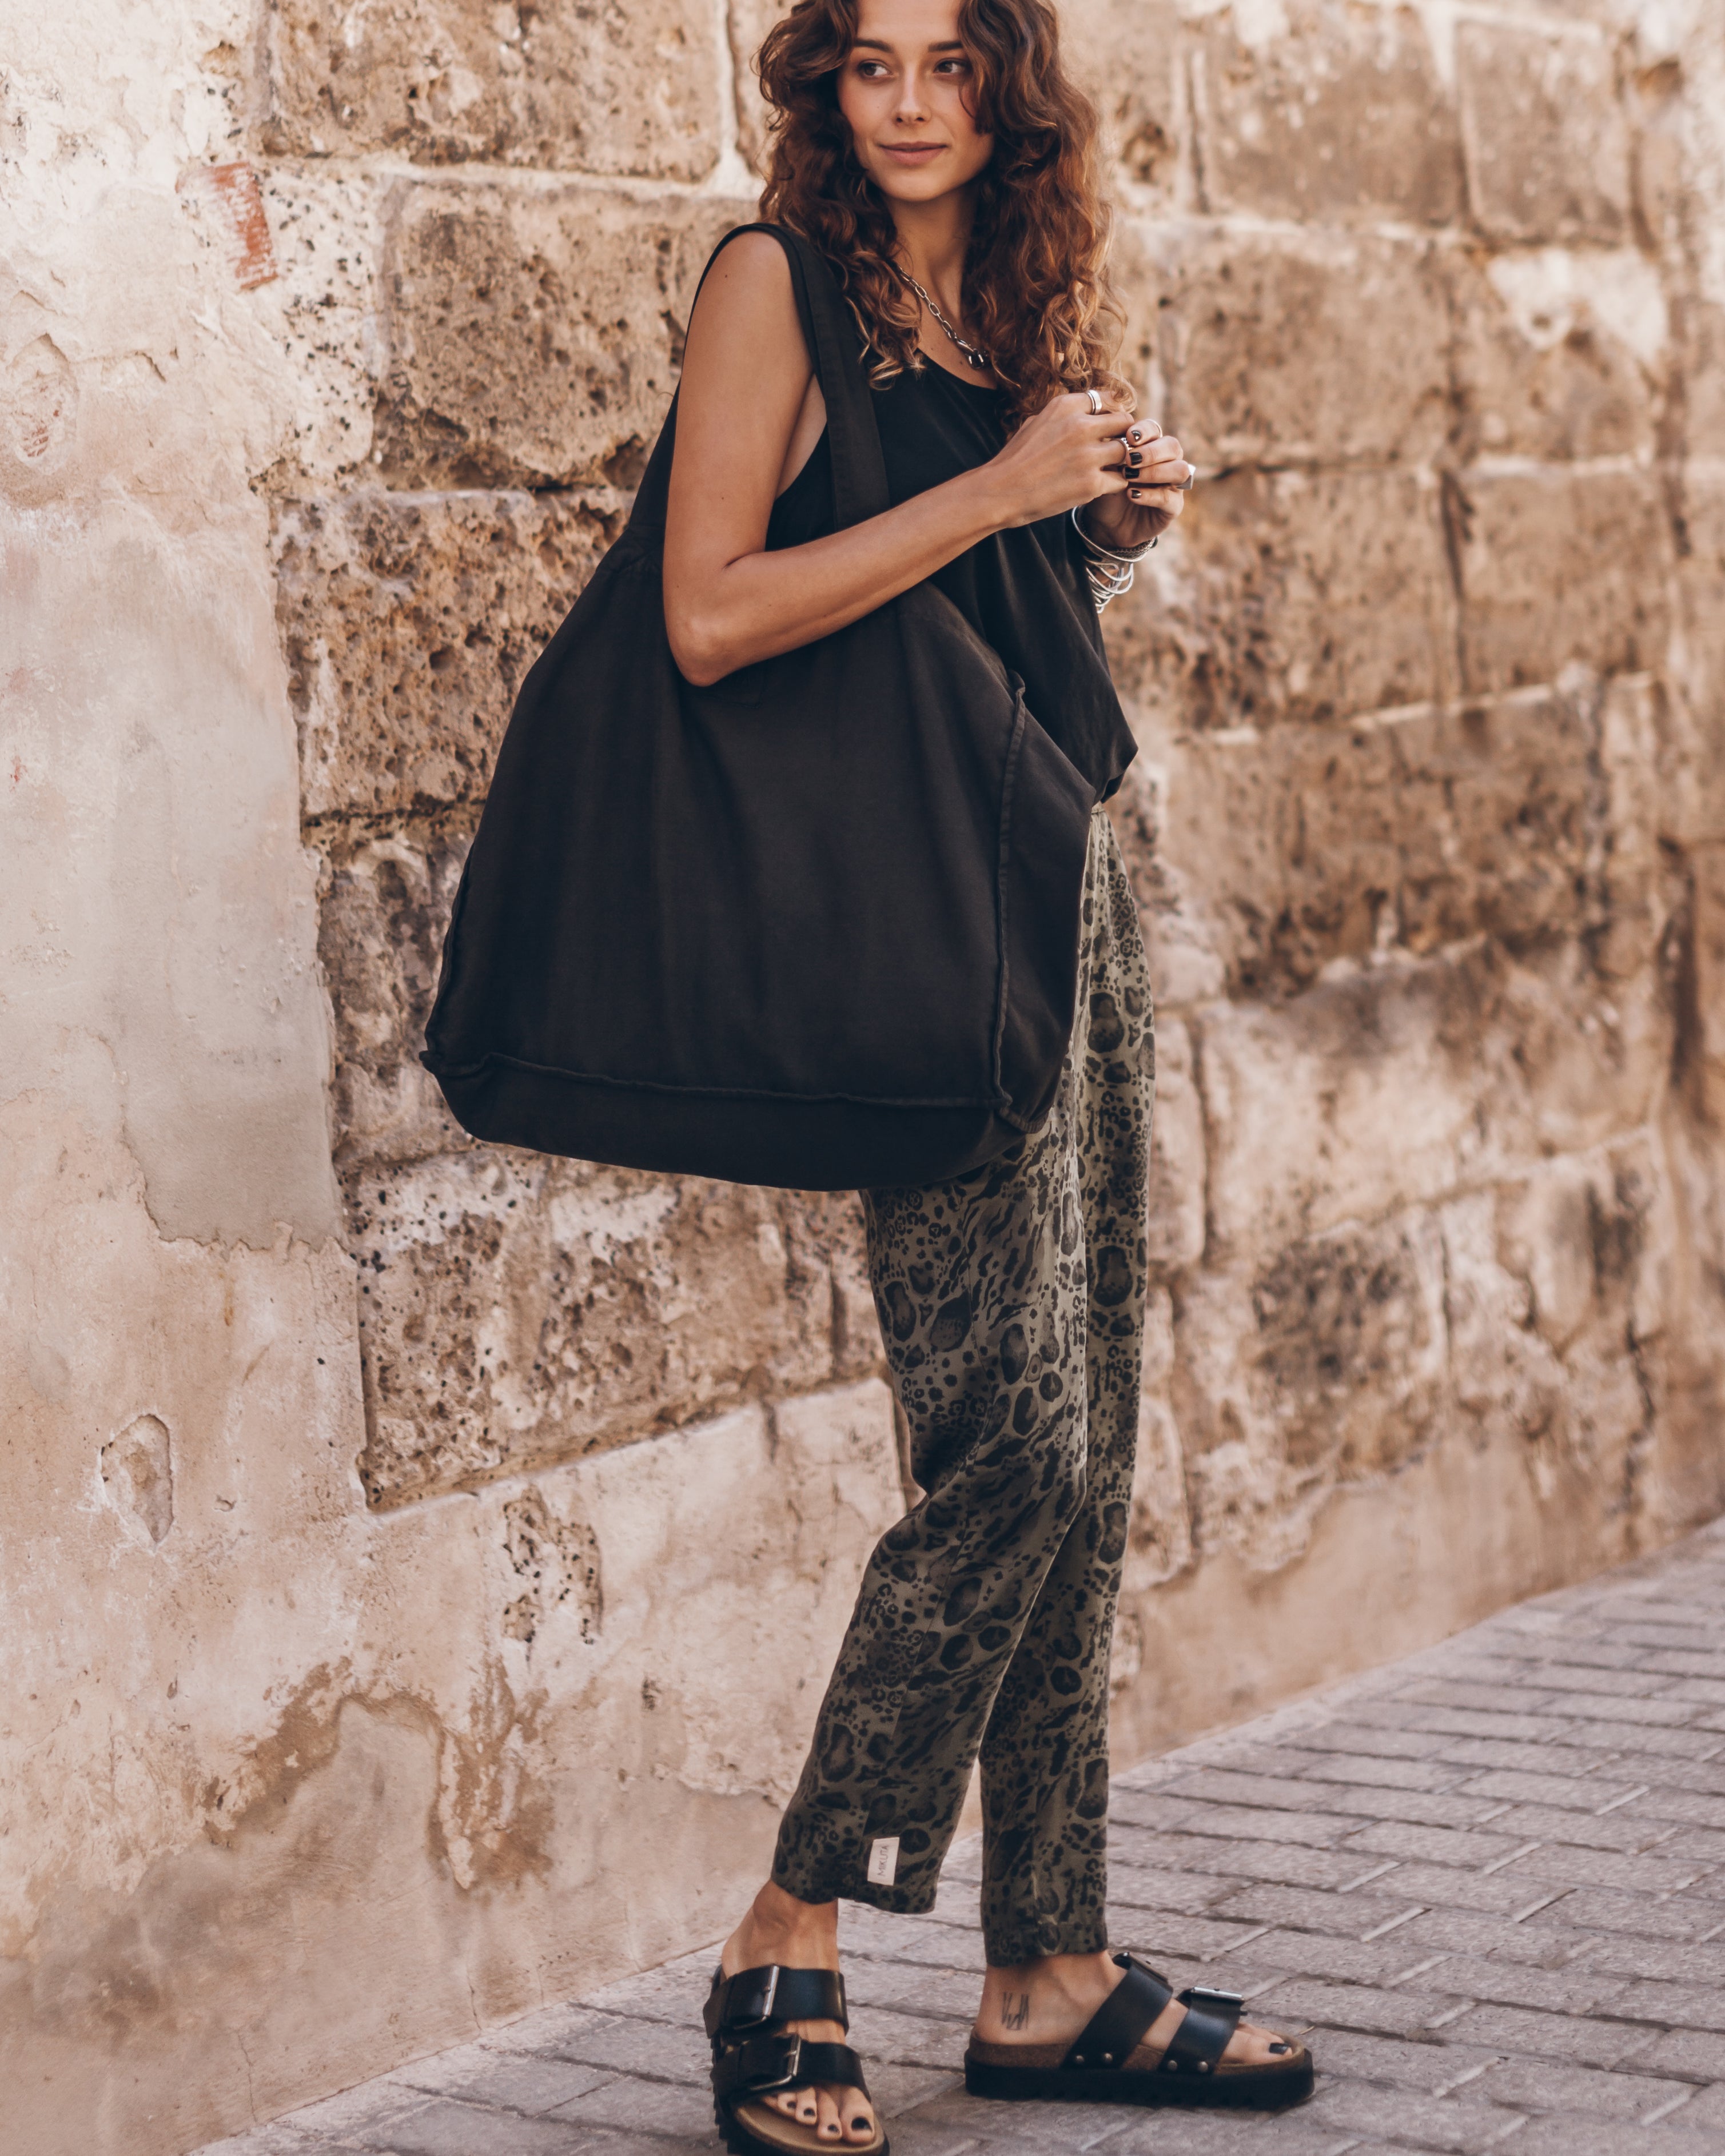 The Charcoal Large Canvas Bag